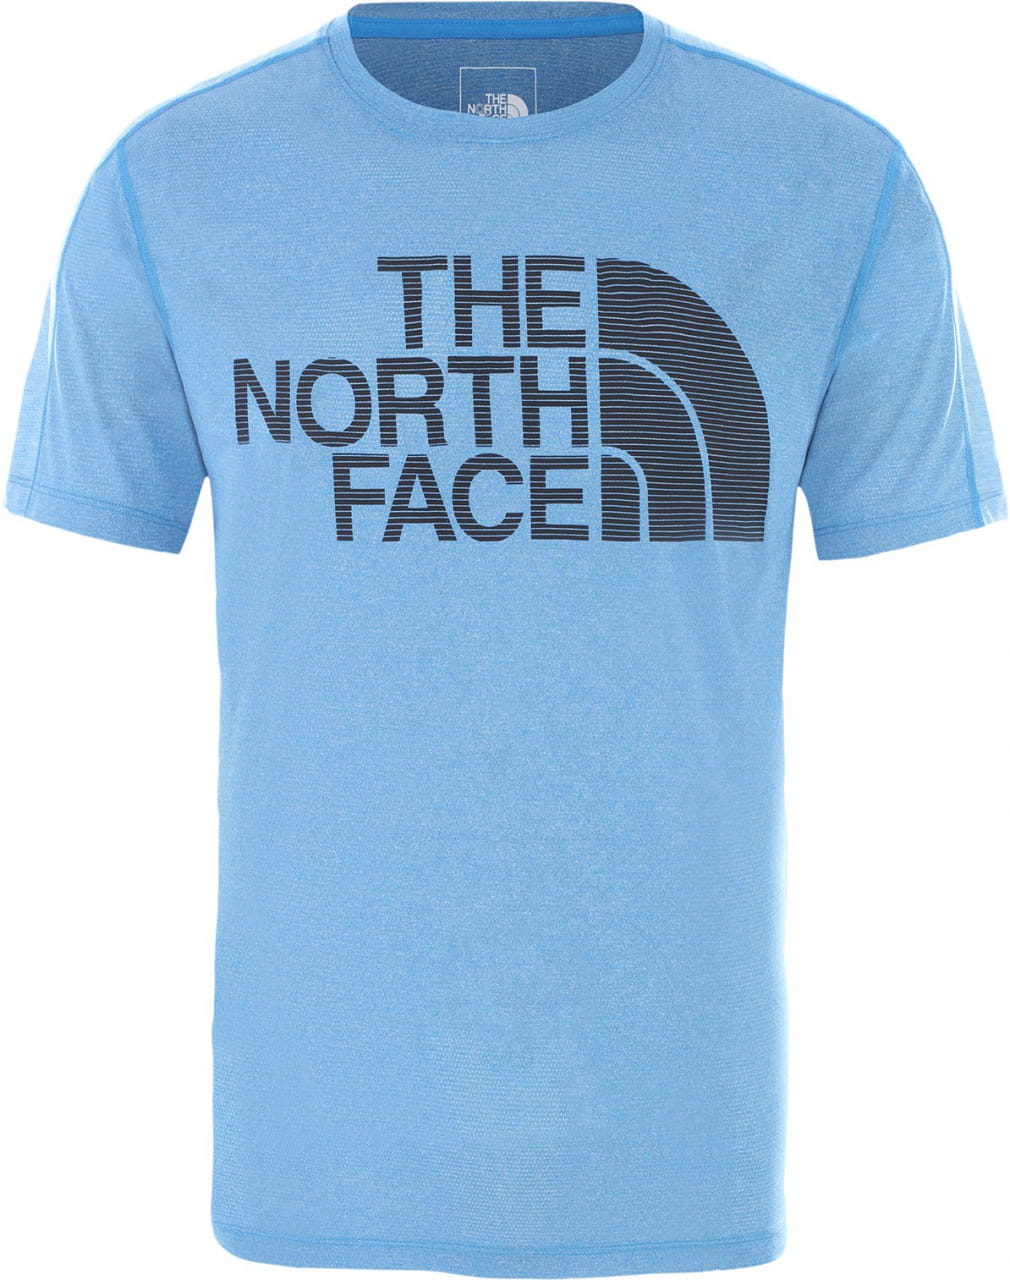 T-Shirts The North Face Men's Flight Series Better Than Naked T-Shirt